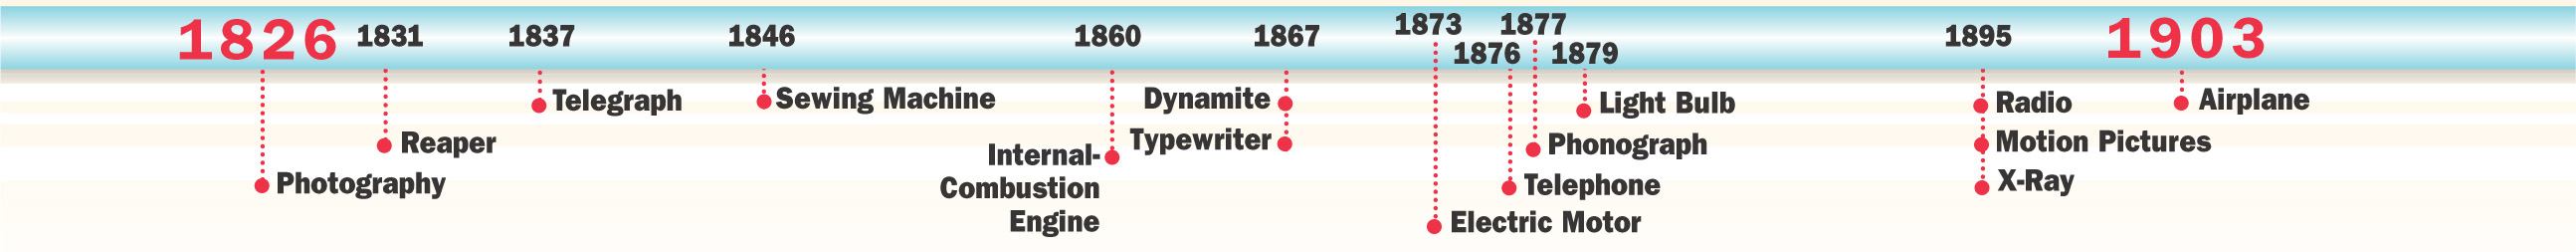 A timeline shows major inventions from 1826-1903.